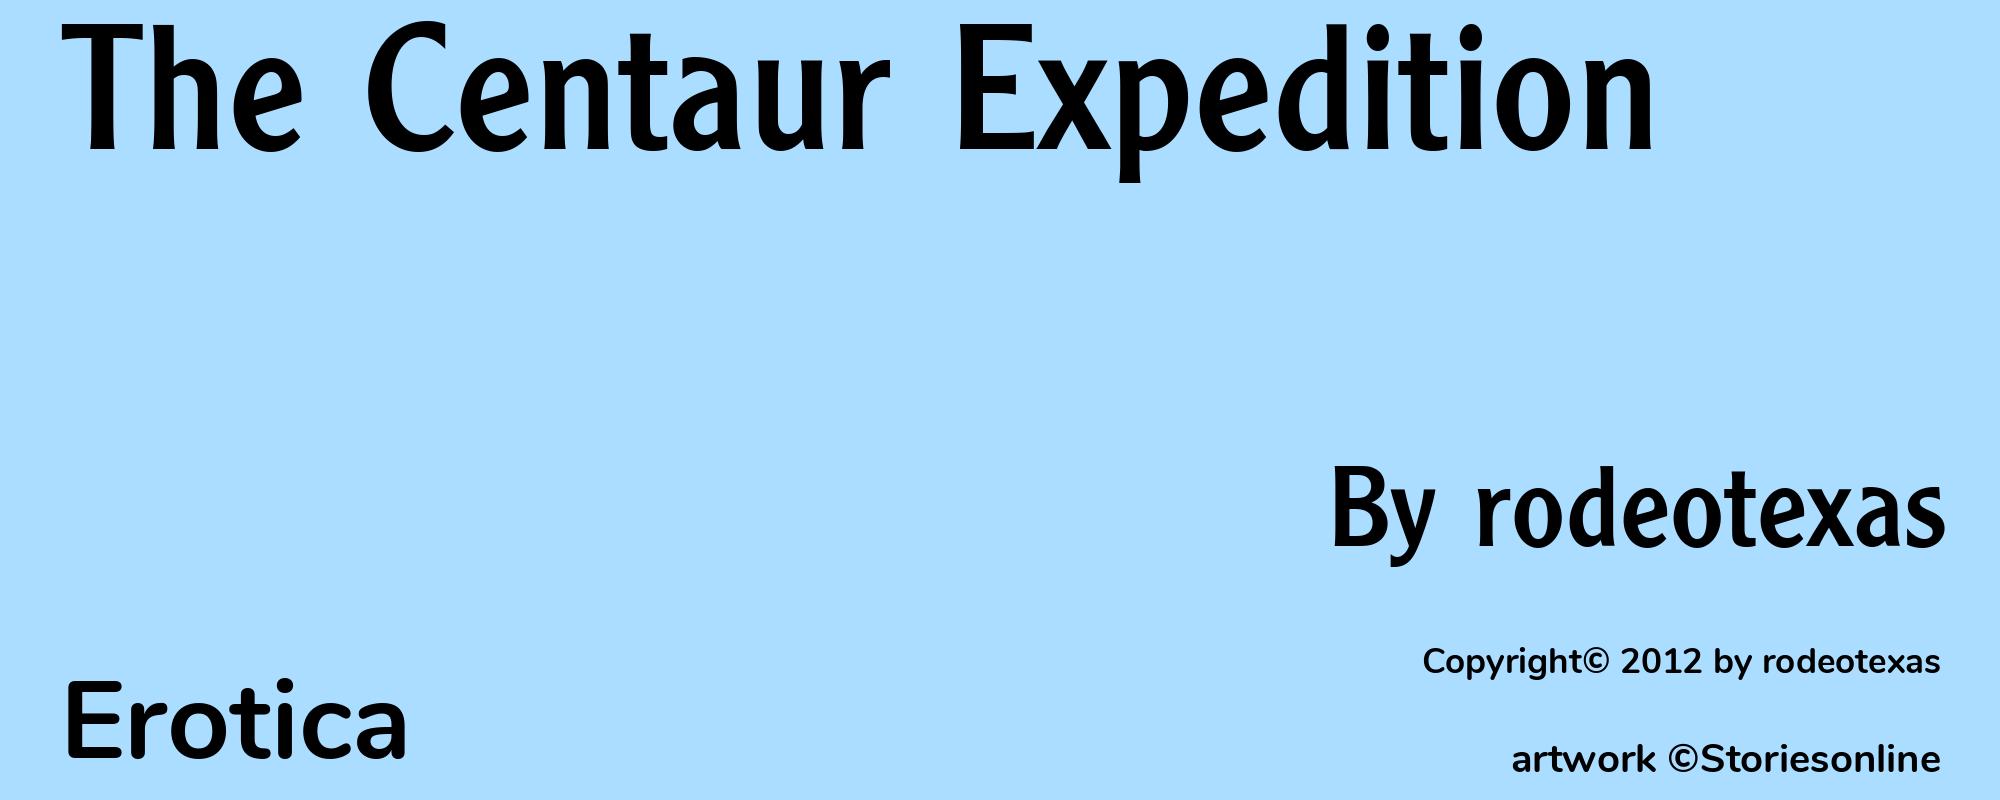 The Centaur Expedition - Cover